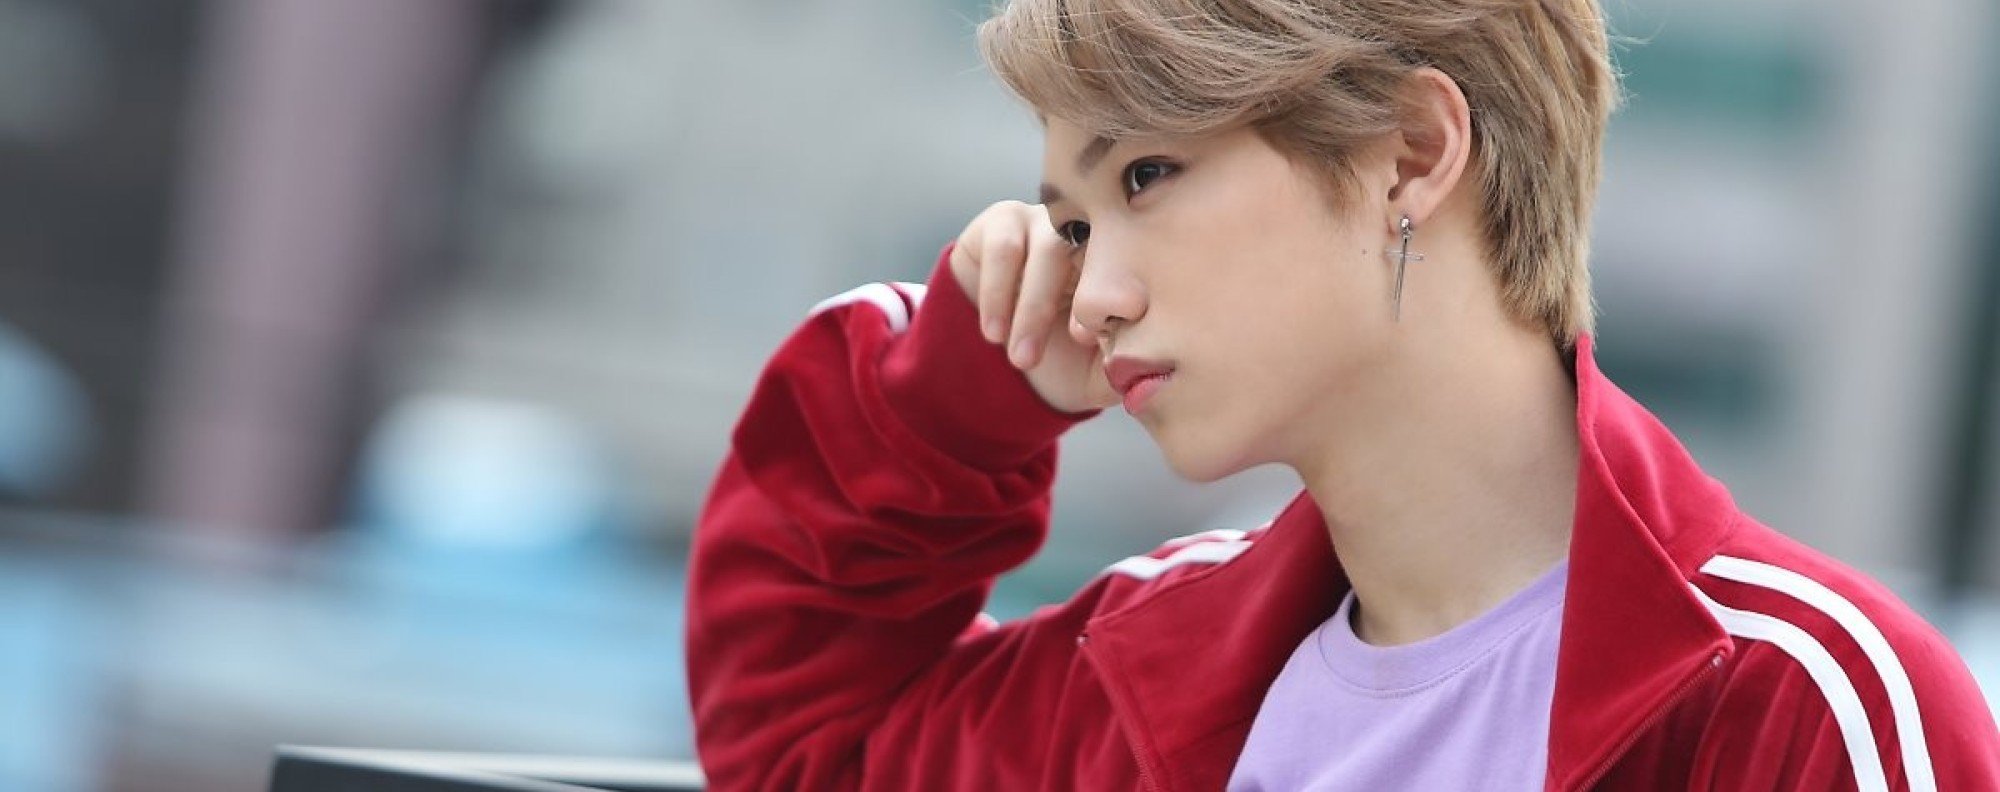 Felix from Stray Kids: with husky voice, catlike looks and intense dancing style, his vocals are one of band's hallmarks. South China Morning Post